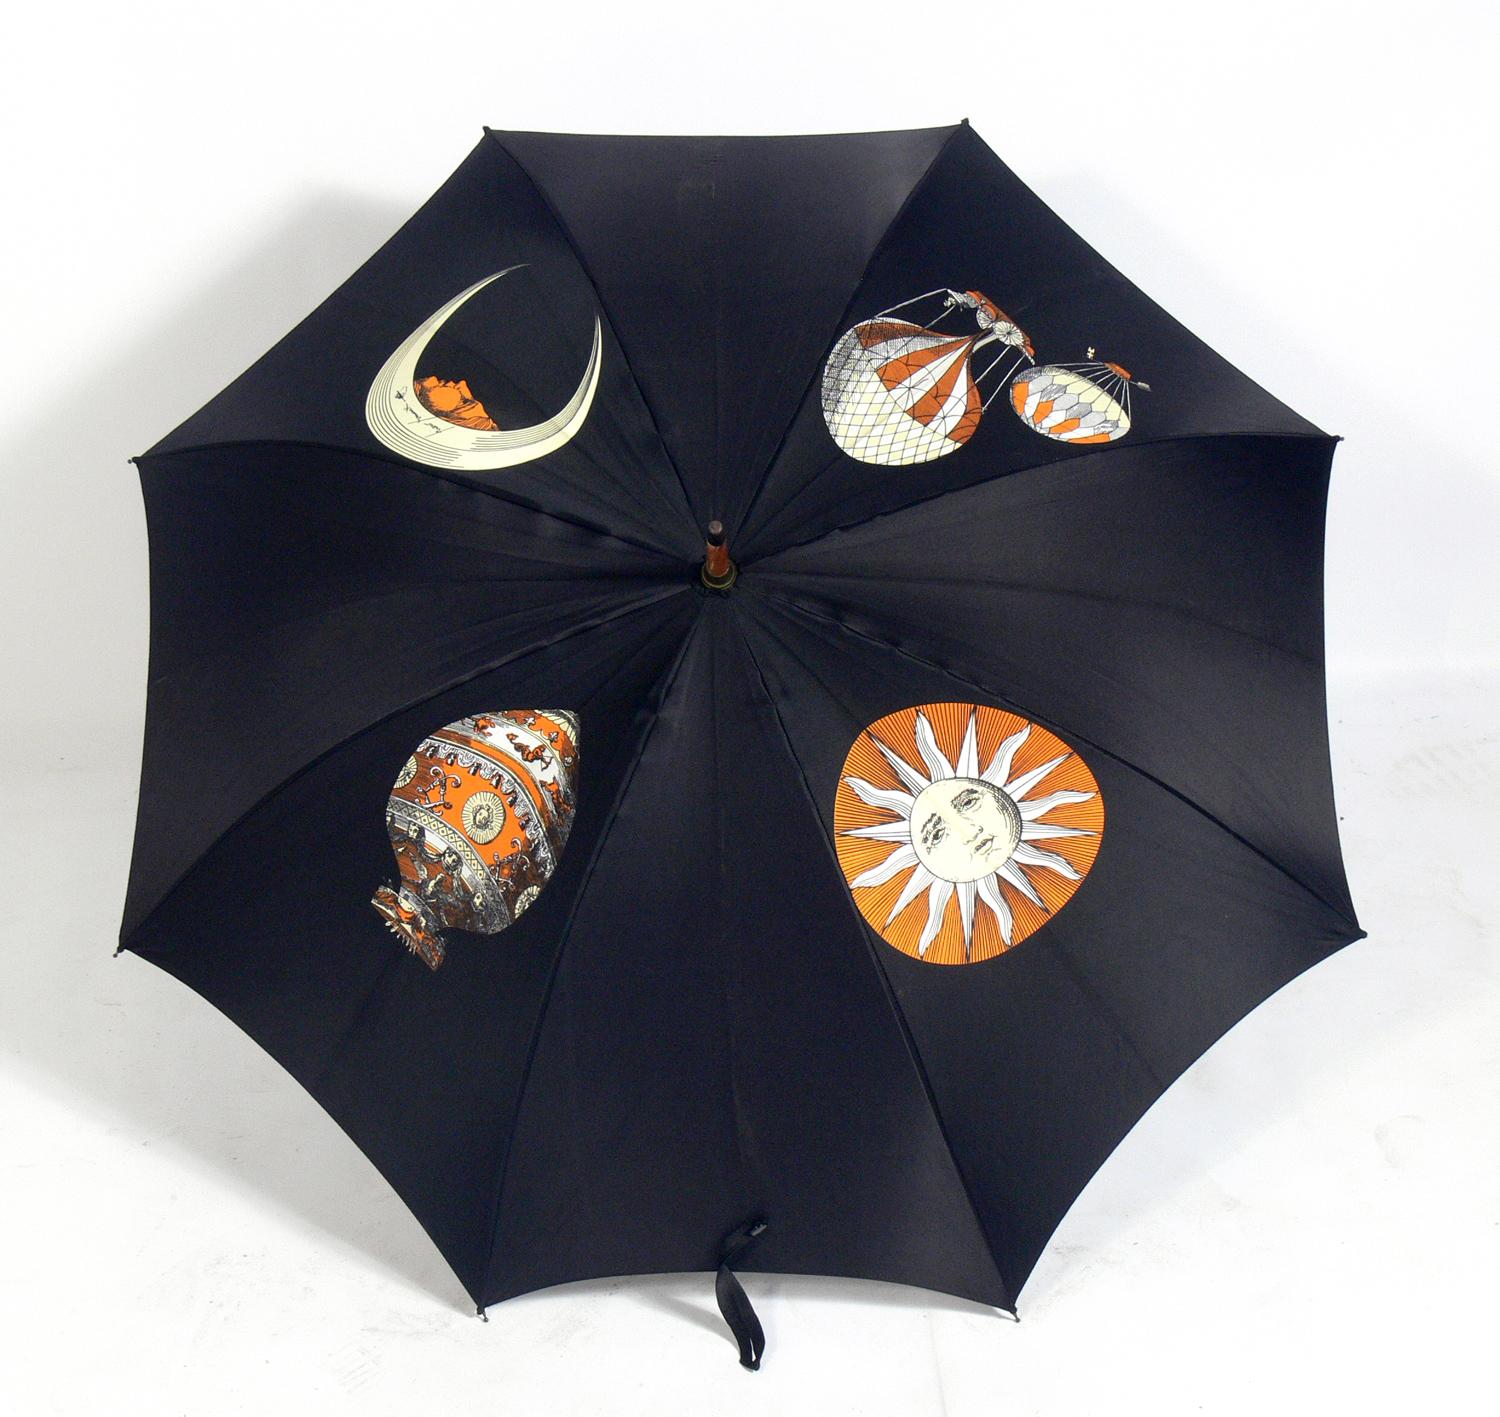 Piero Fornasetti Umbrella, Italy, circa 1960s. Still functions well. Perfect gift for your most stylish loved one.